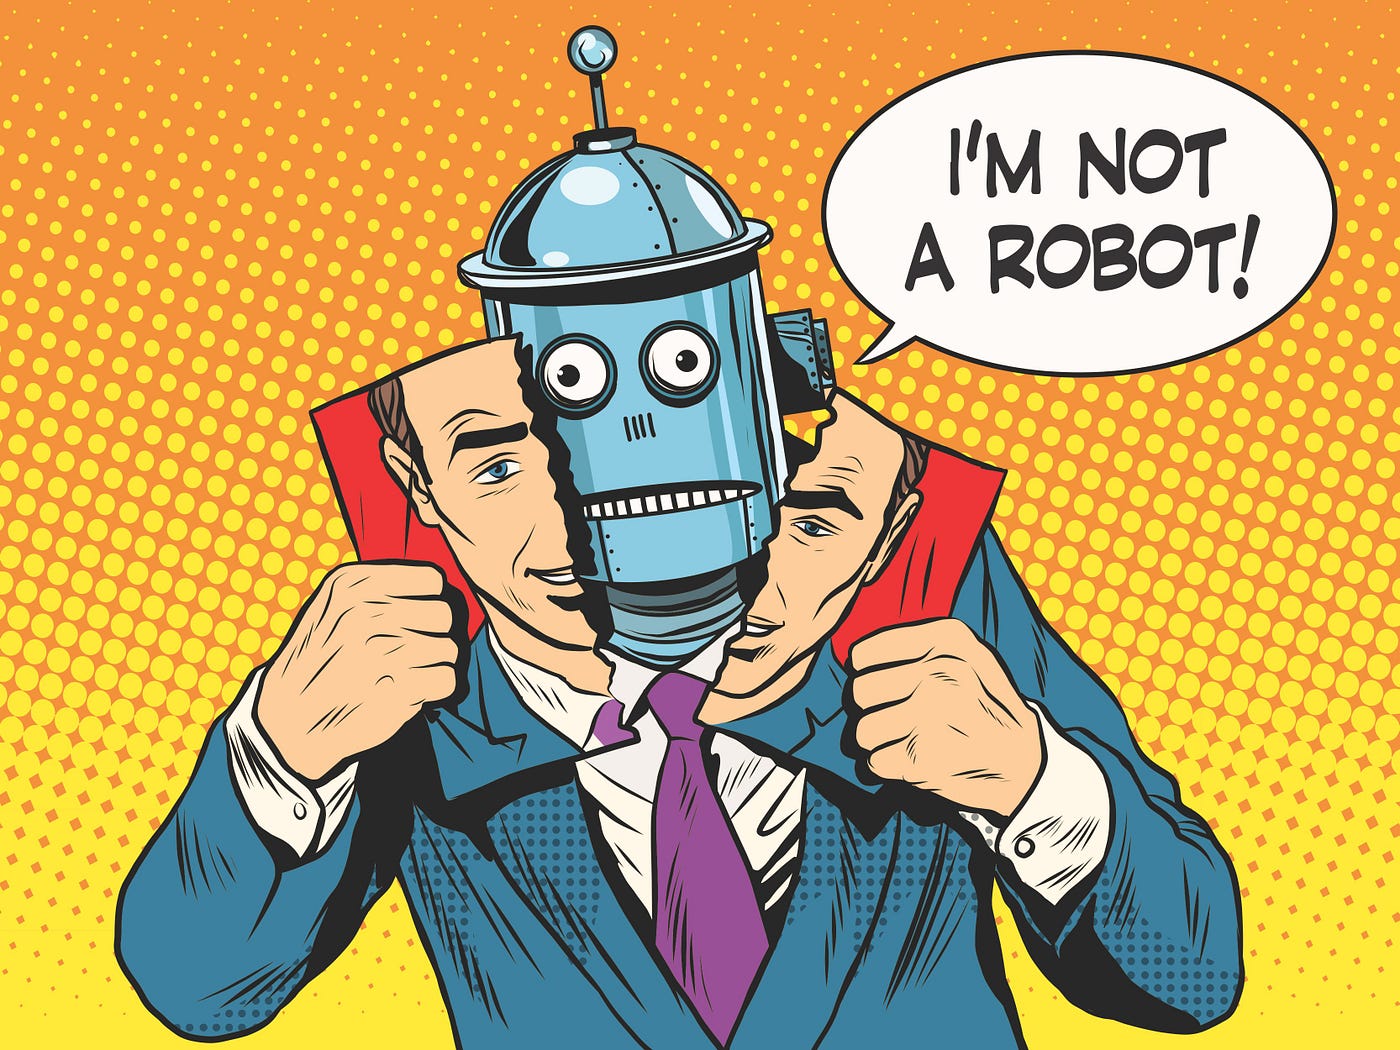 Man confidently stating, "I am not a robot."